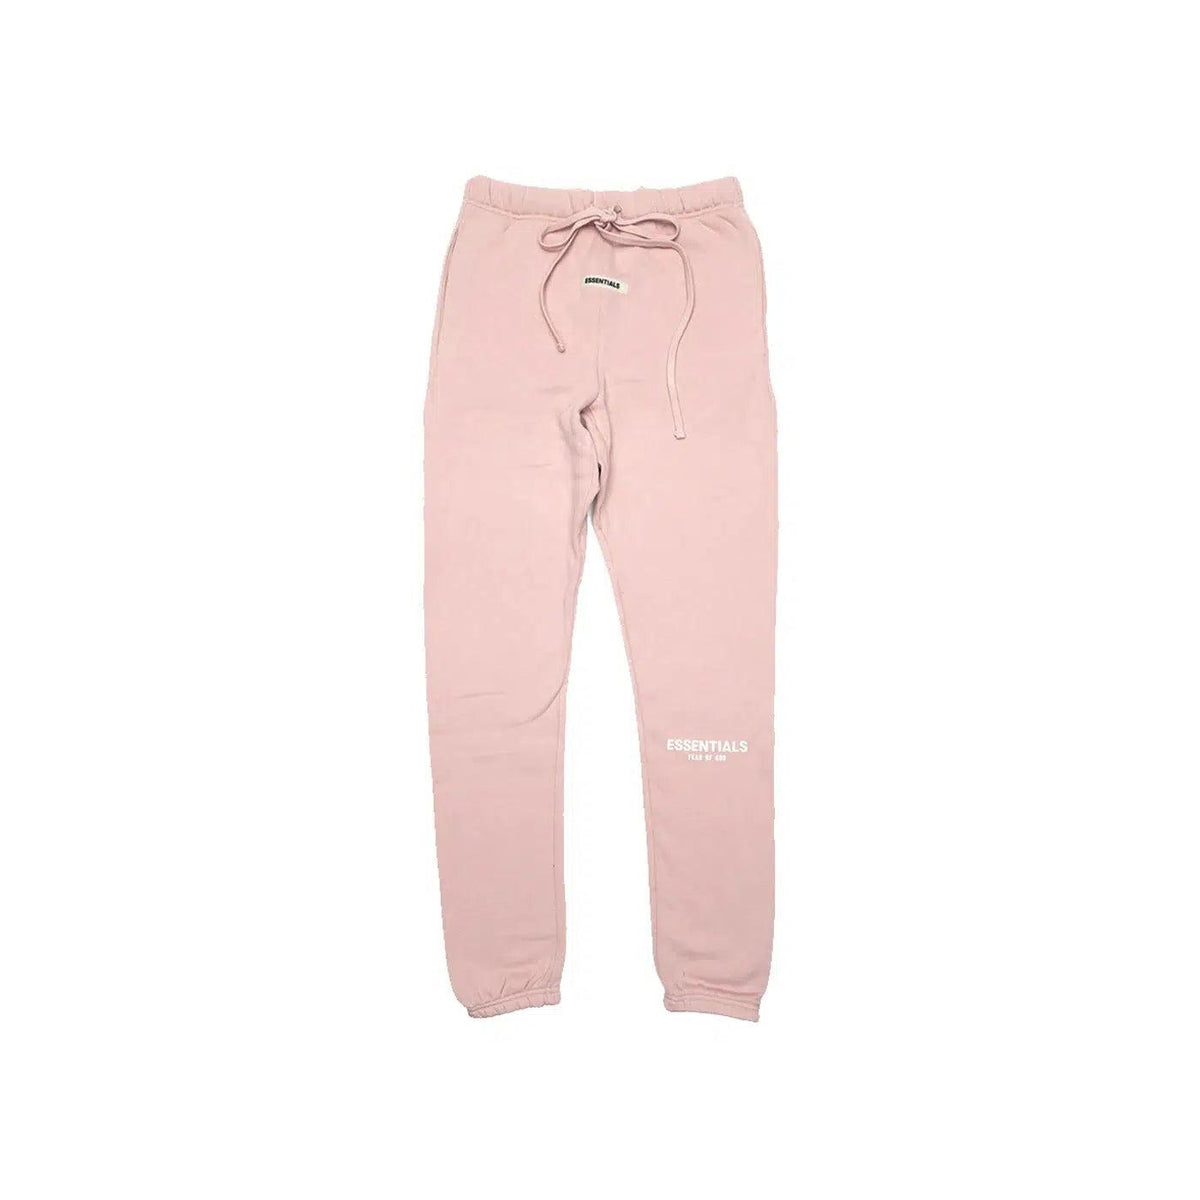 FEAR OF GOD ESSENTIALS SWEATPANTS SS19 BLUSH | Waves Never Die | Fear of God | Pants